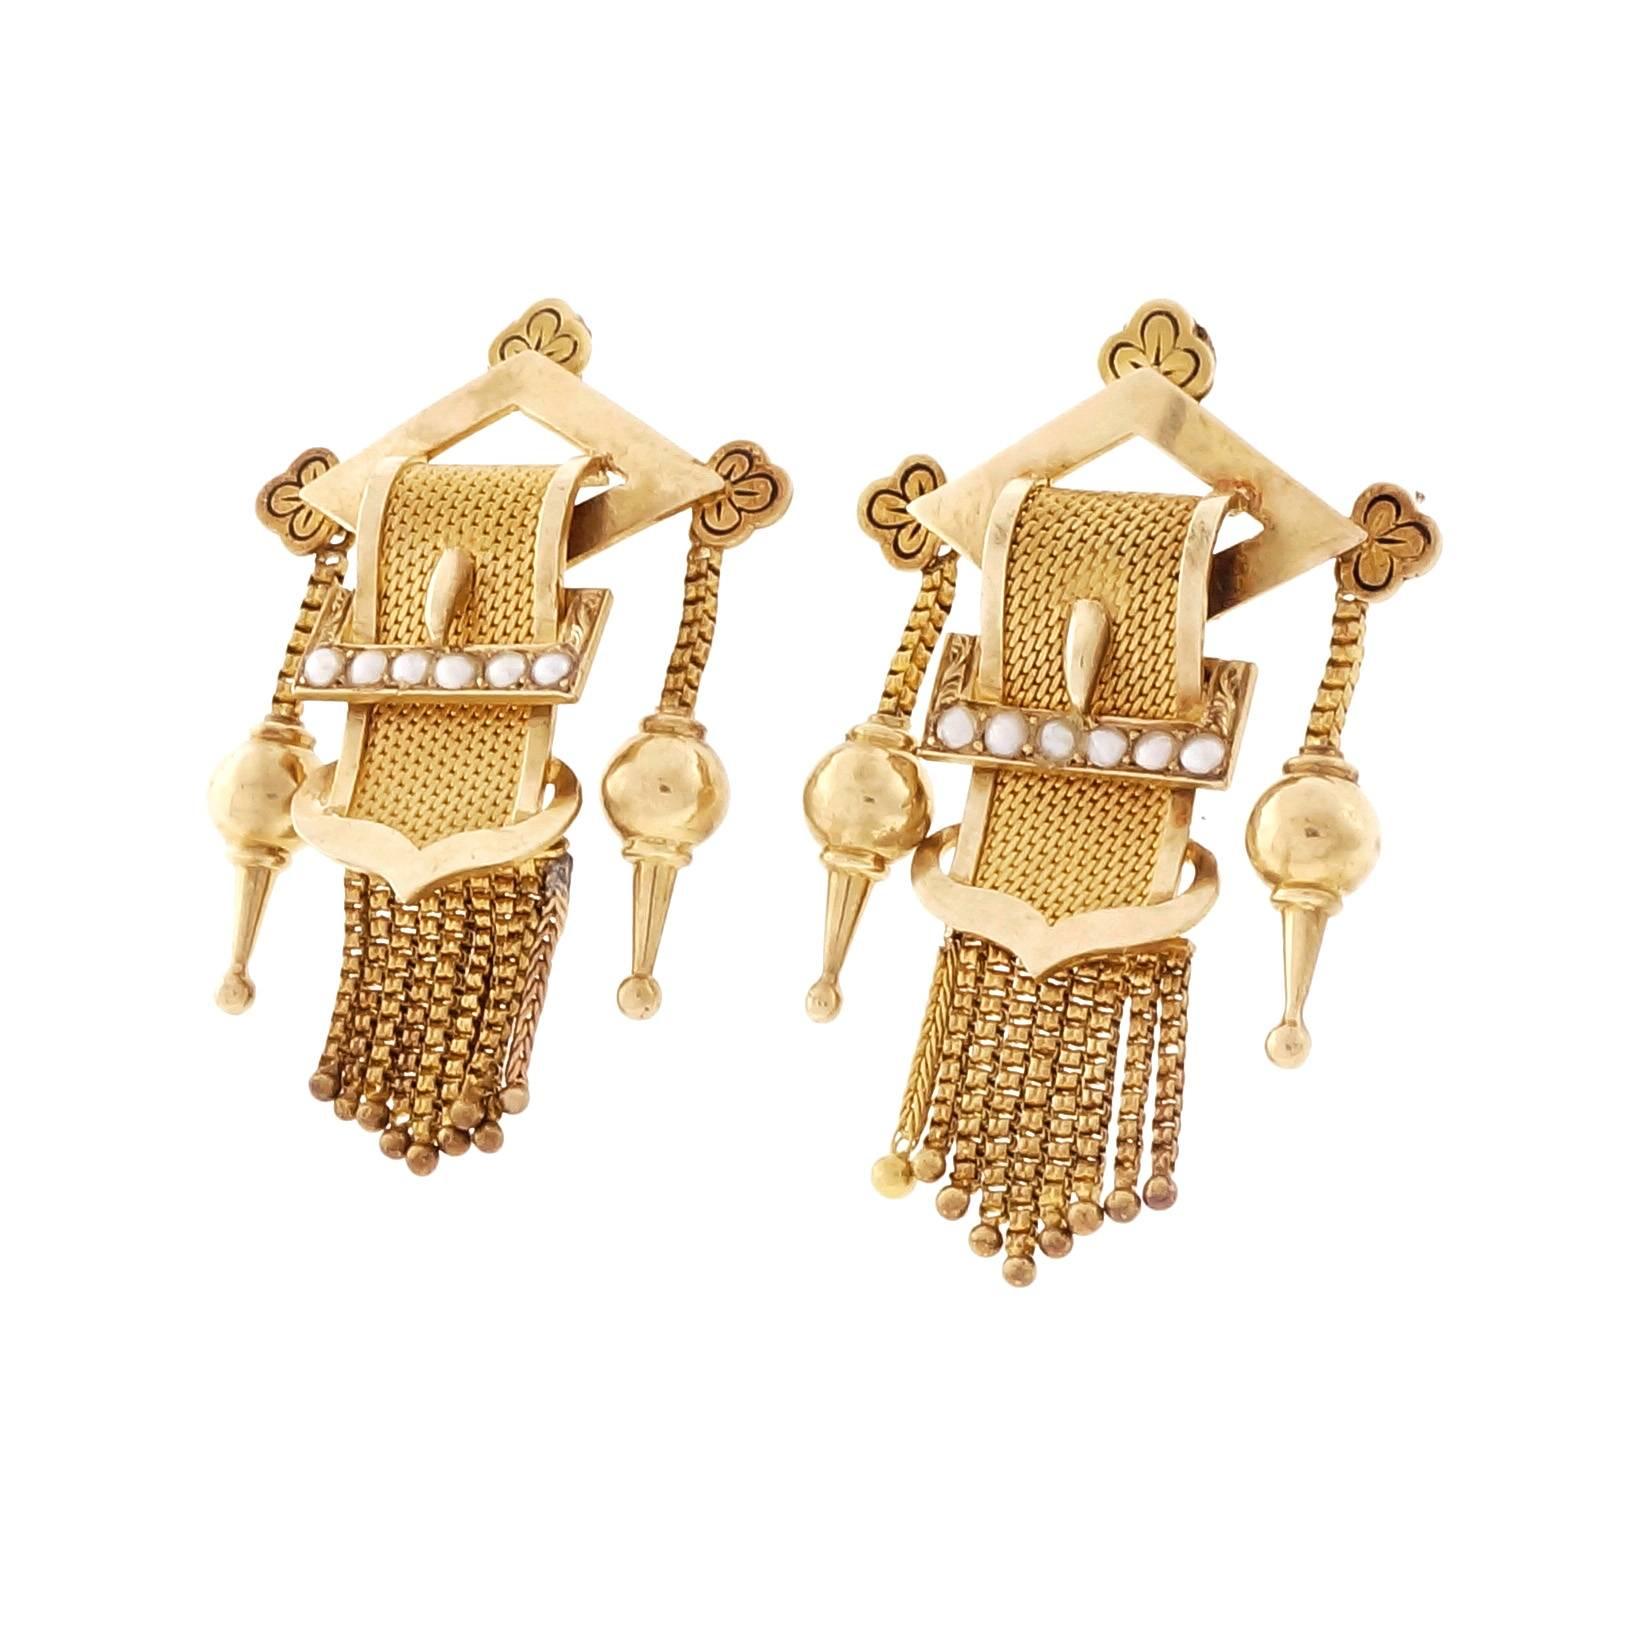 Victorian 1880 18k yellow gold tassel buckle natural pearl 18k yellow gold pierced post earrings. Natural patina.

12 natural half pearls 2mm
18k yellow gold
Tested: 18k
Stamped: 750
12.6 grams
Top to bottom: 39.68mm or 1.56 inches
Width: